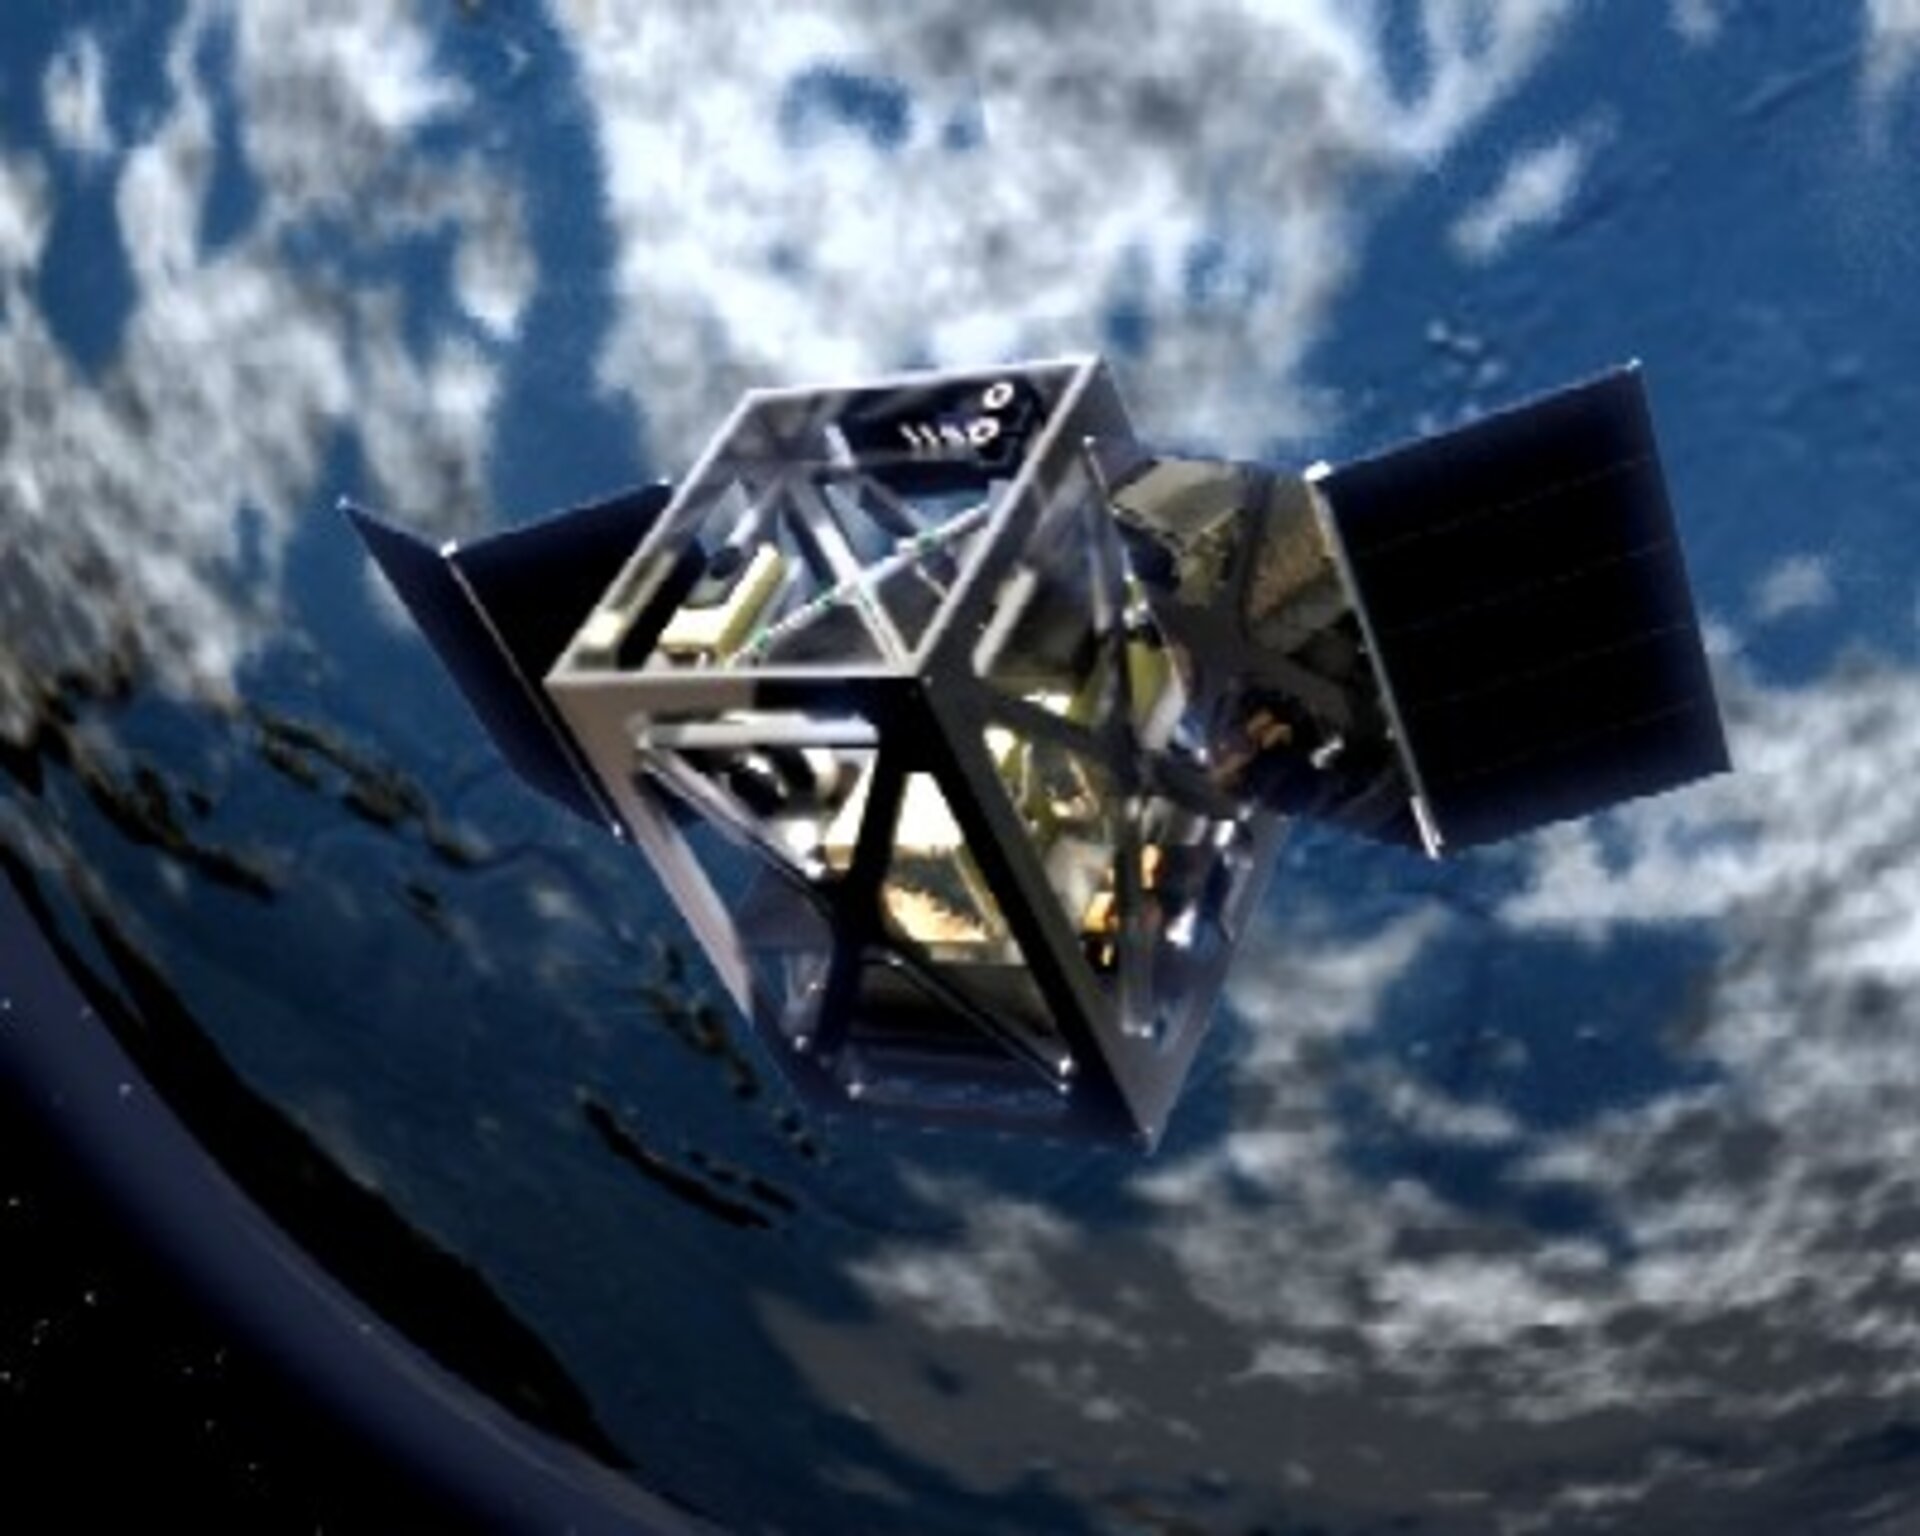 European students join together to build satellites